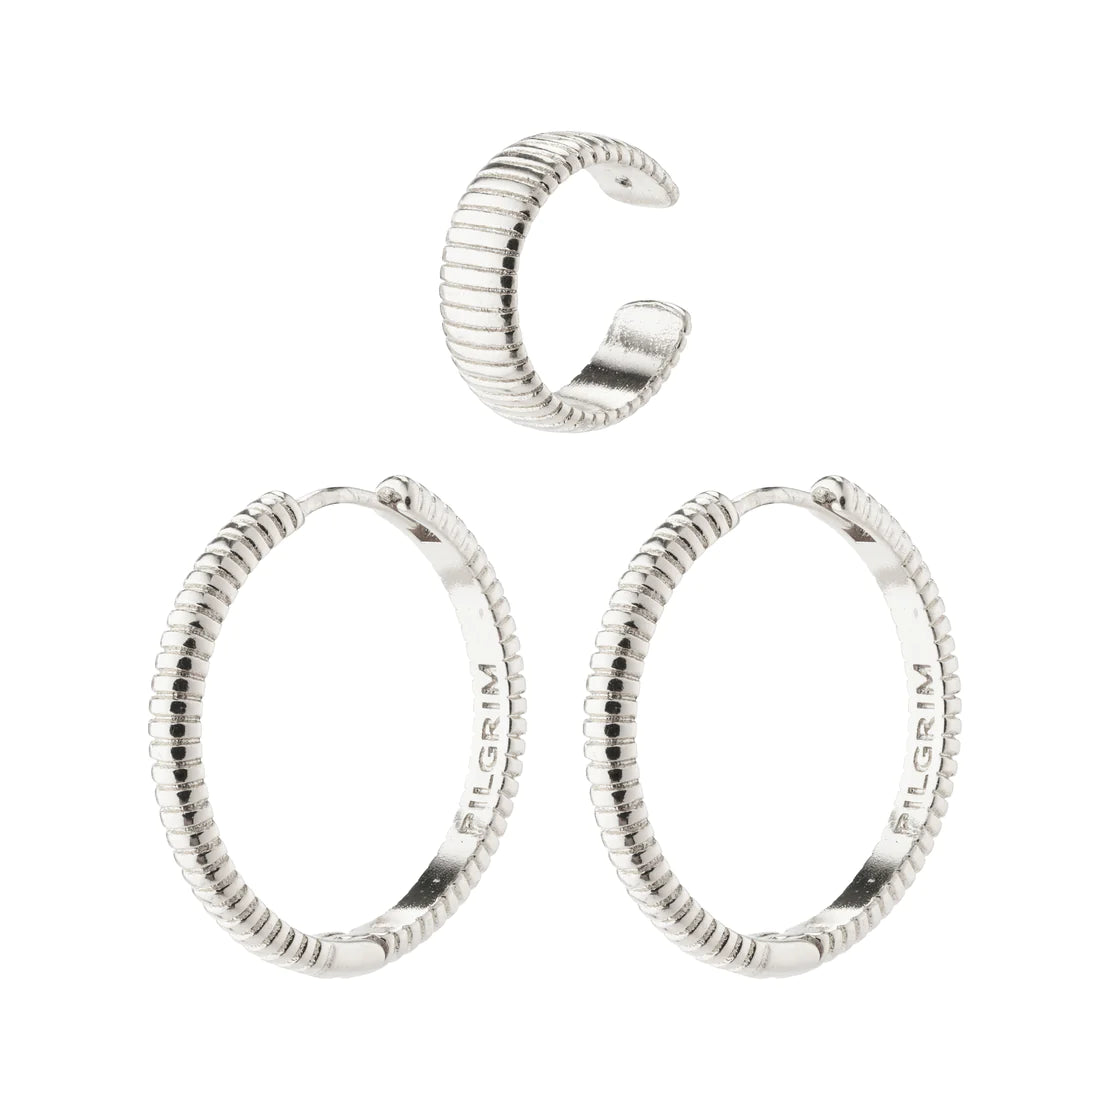 XENA RECYCLED HOOP & CUFF EARRINGS SILVER PLATED